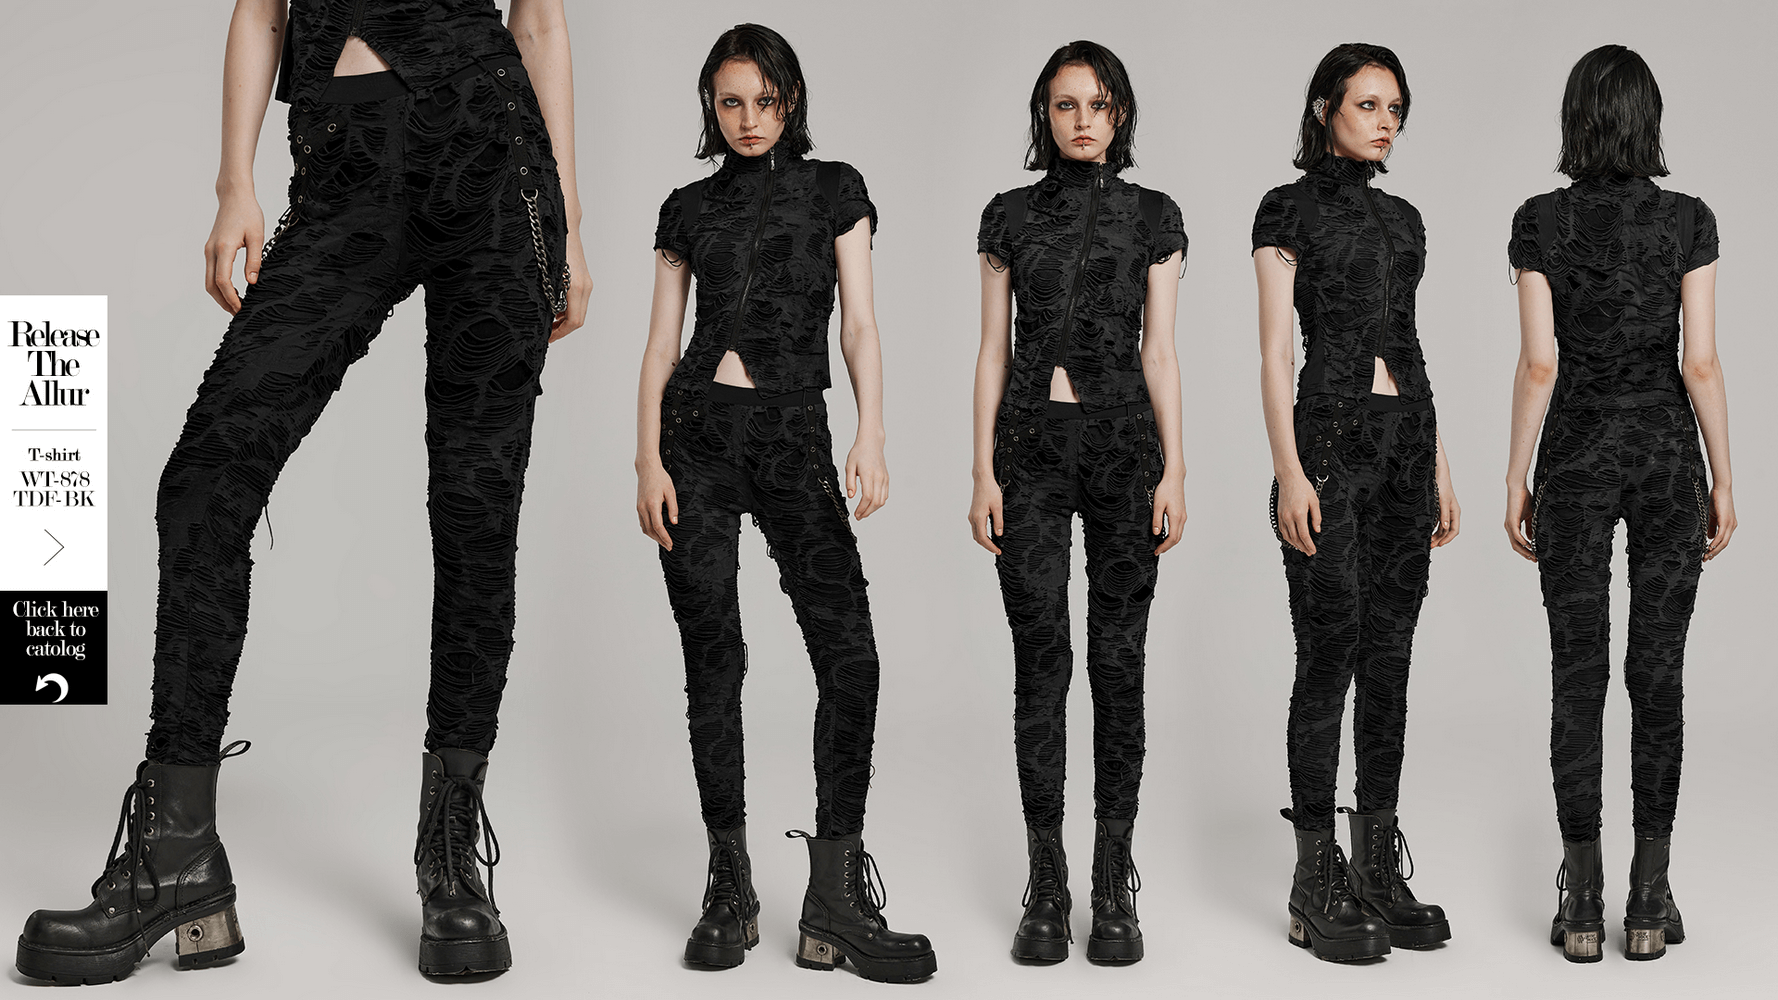 Edgy Women's Chain Detail Ripped Skinny Trousers